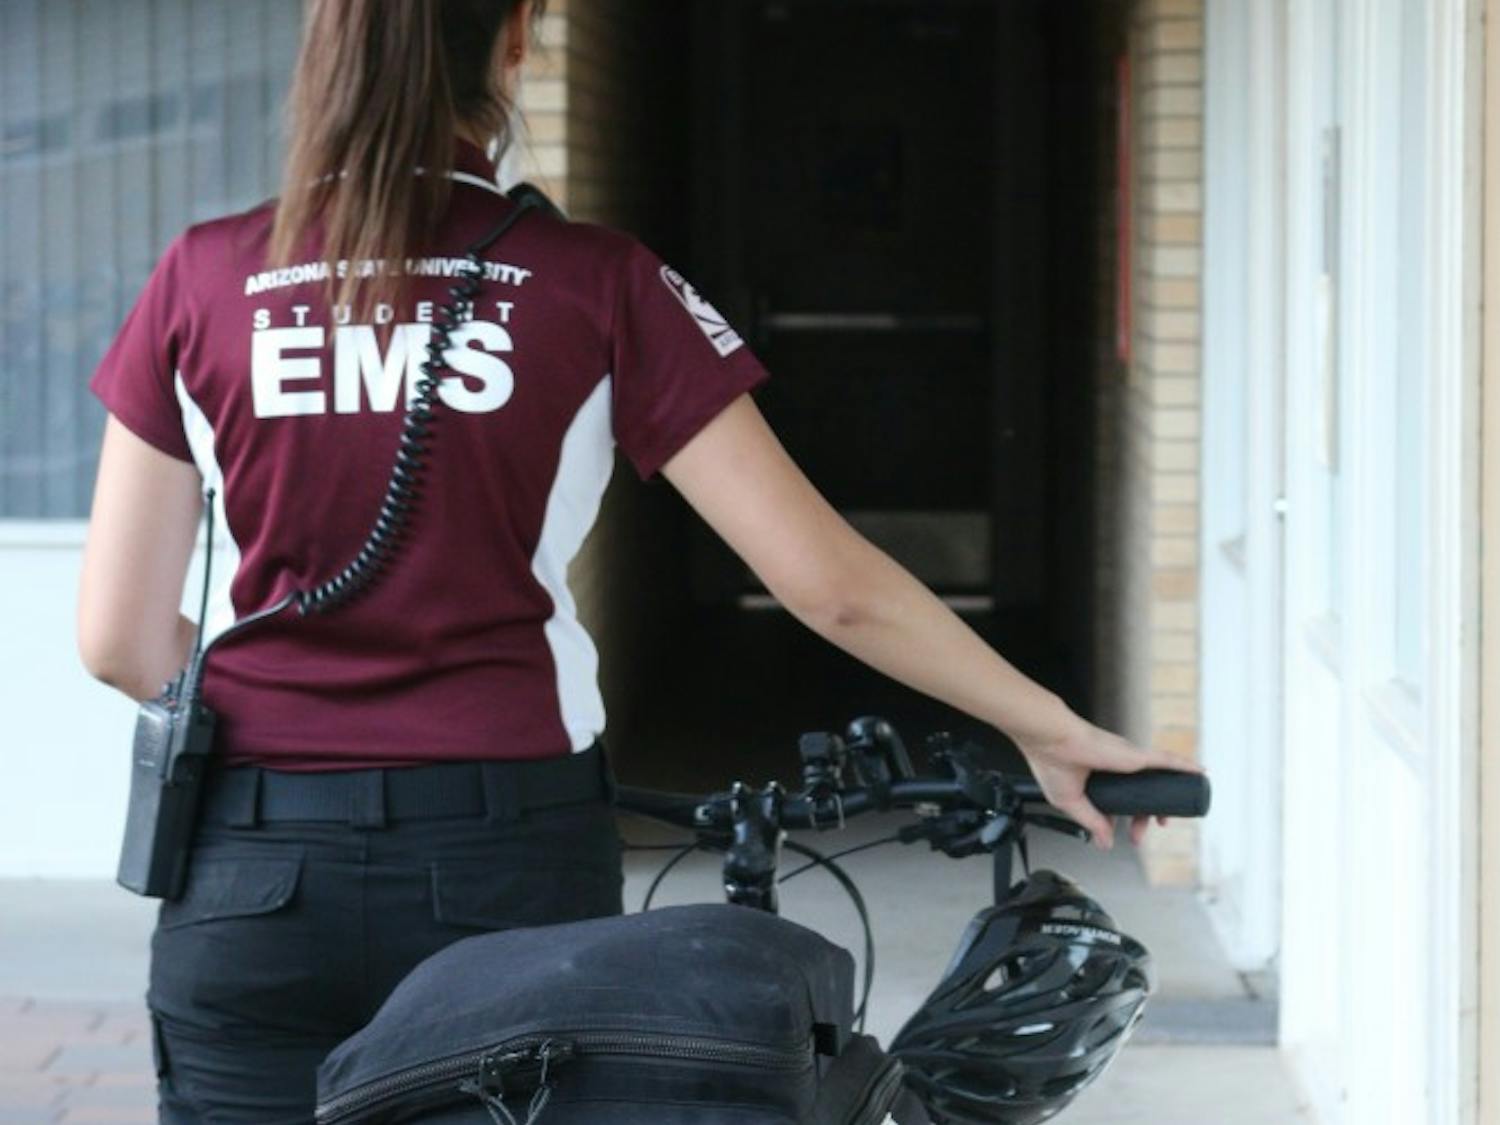 Jada Wang works with&nbsp;Student Emergency Medical Services on campus.&nbsp;